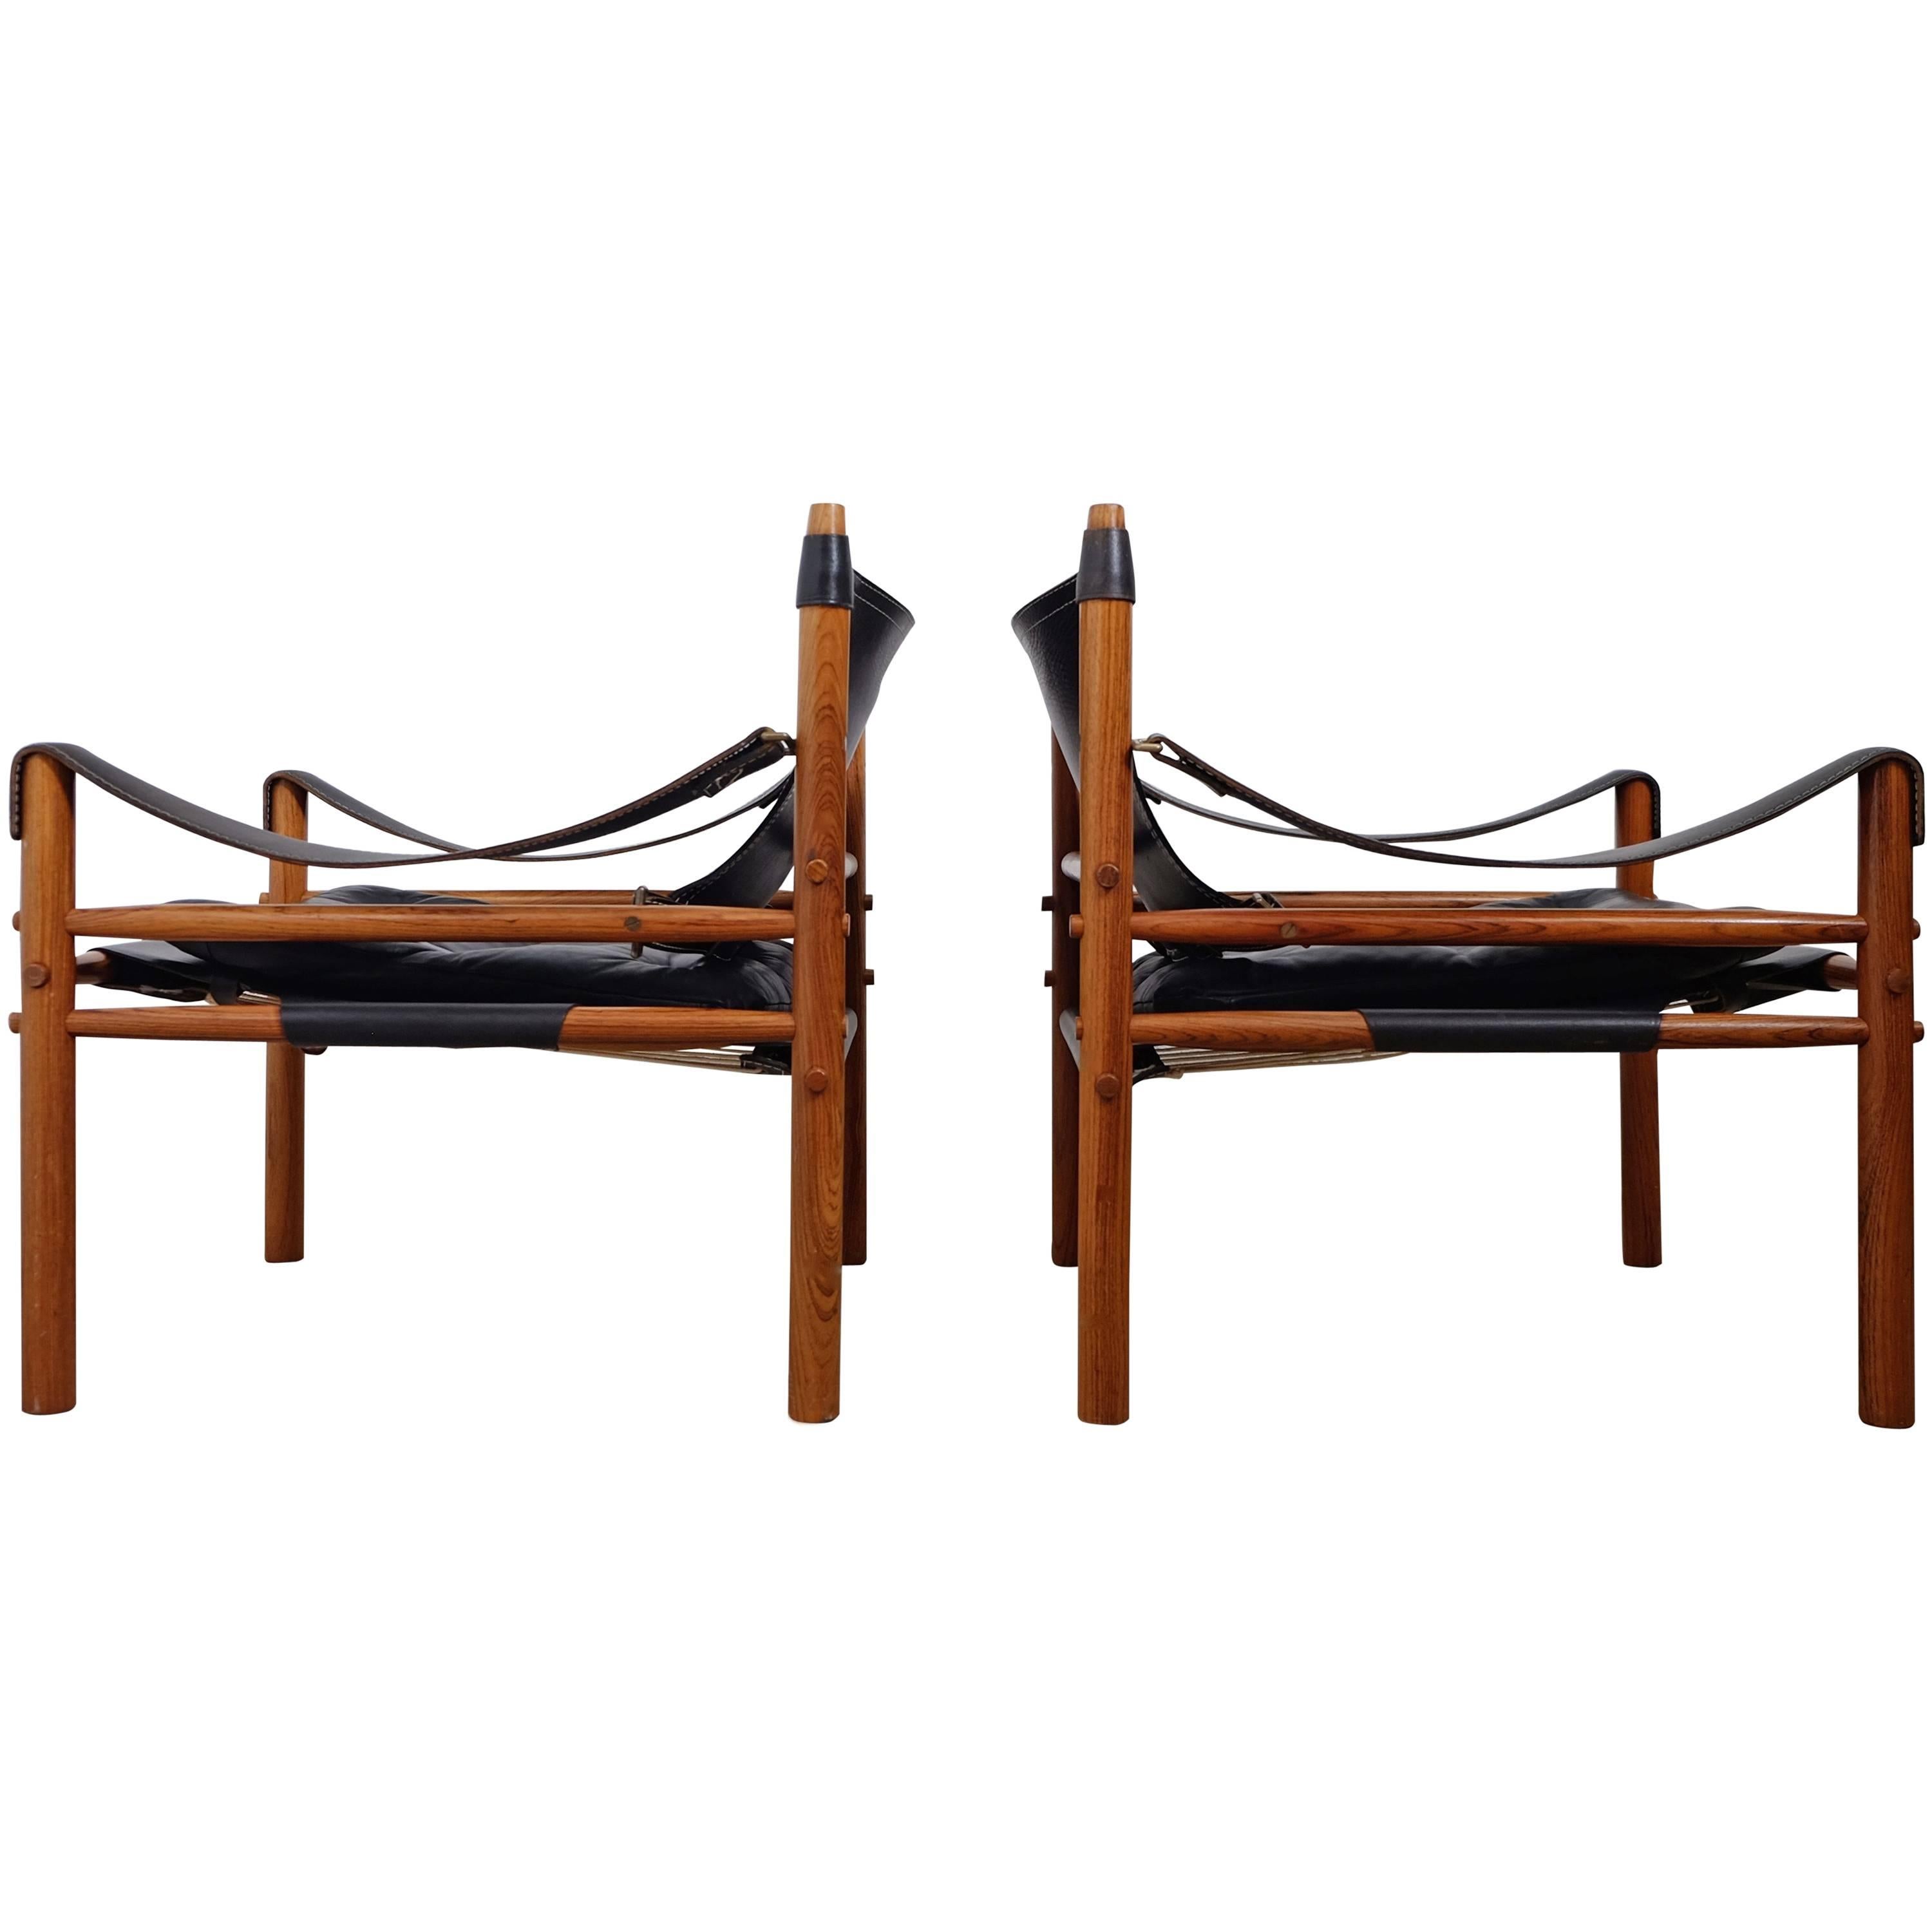 Arne Norell "Sirocco" Easy Chairs Sirocco